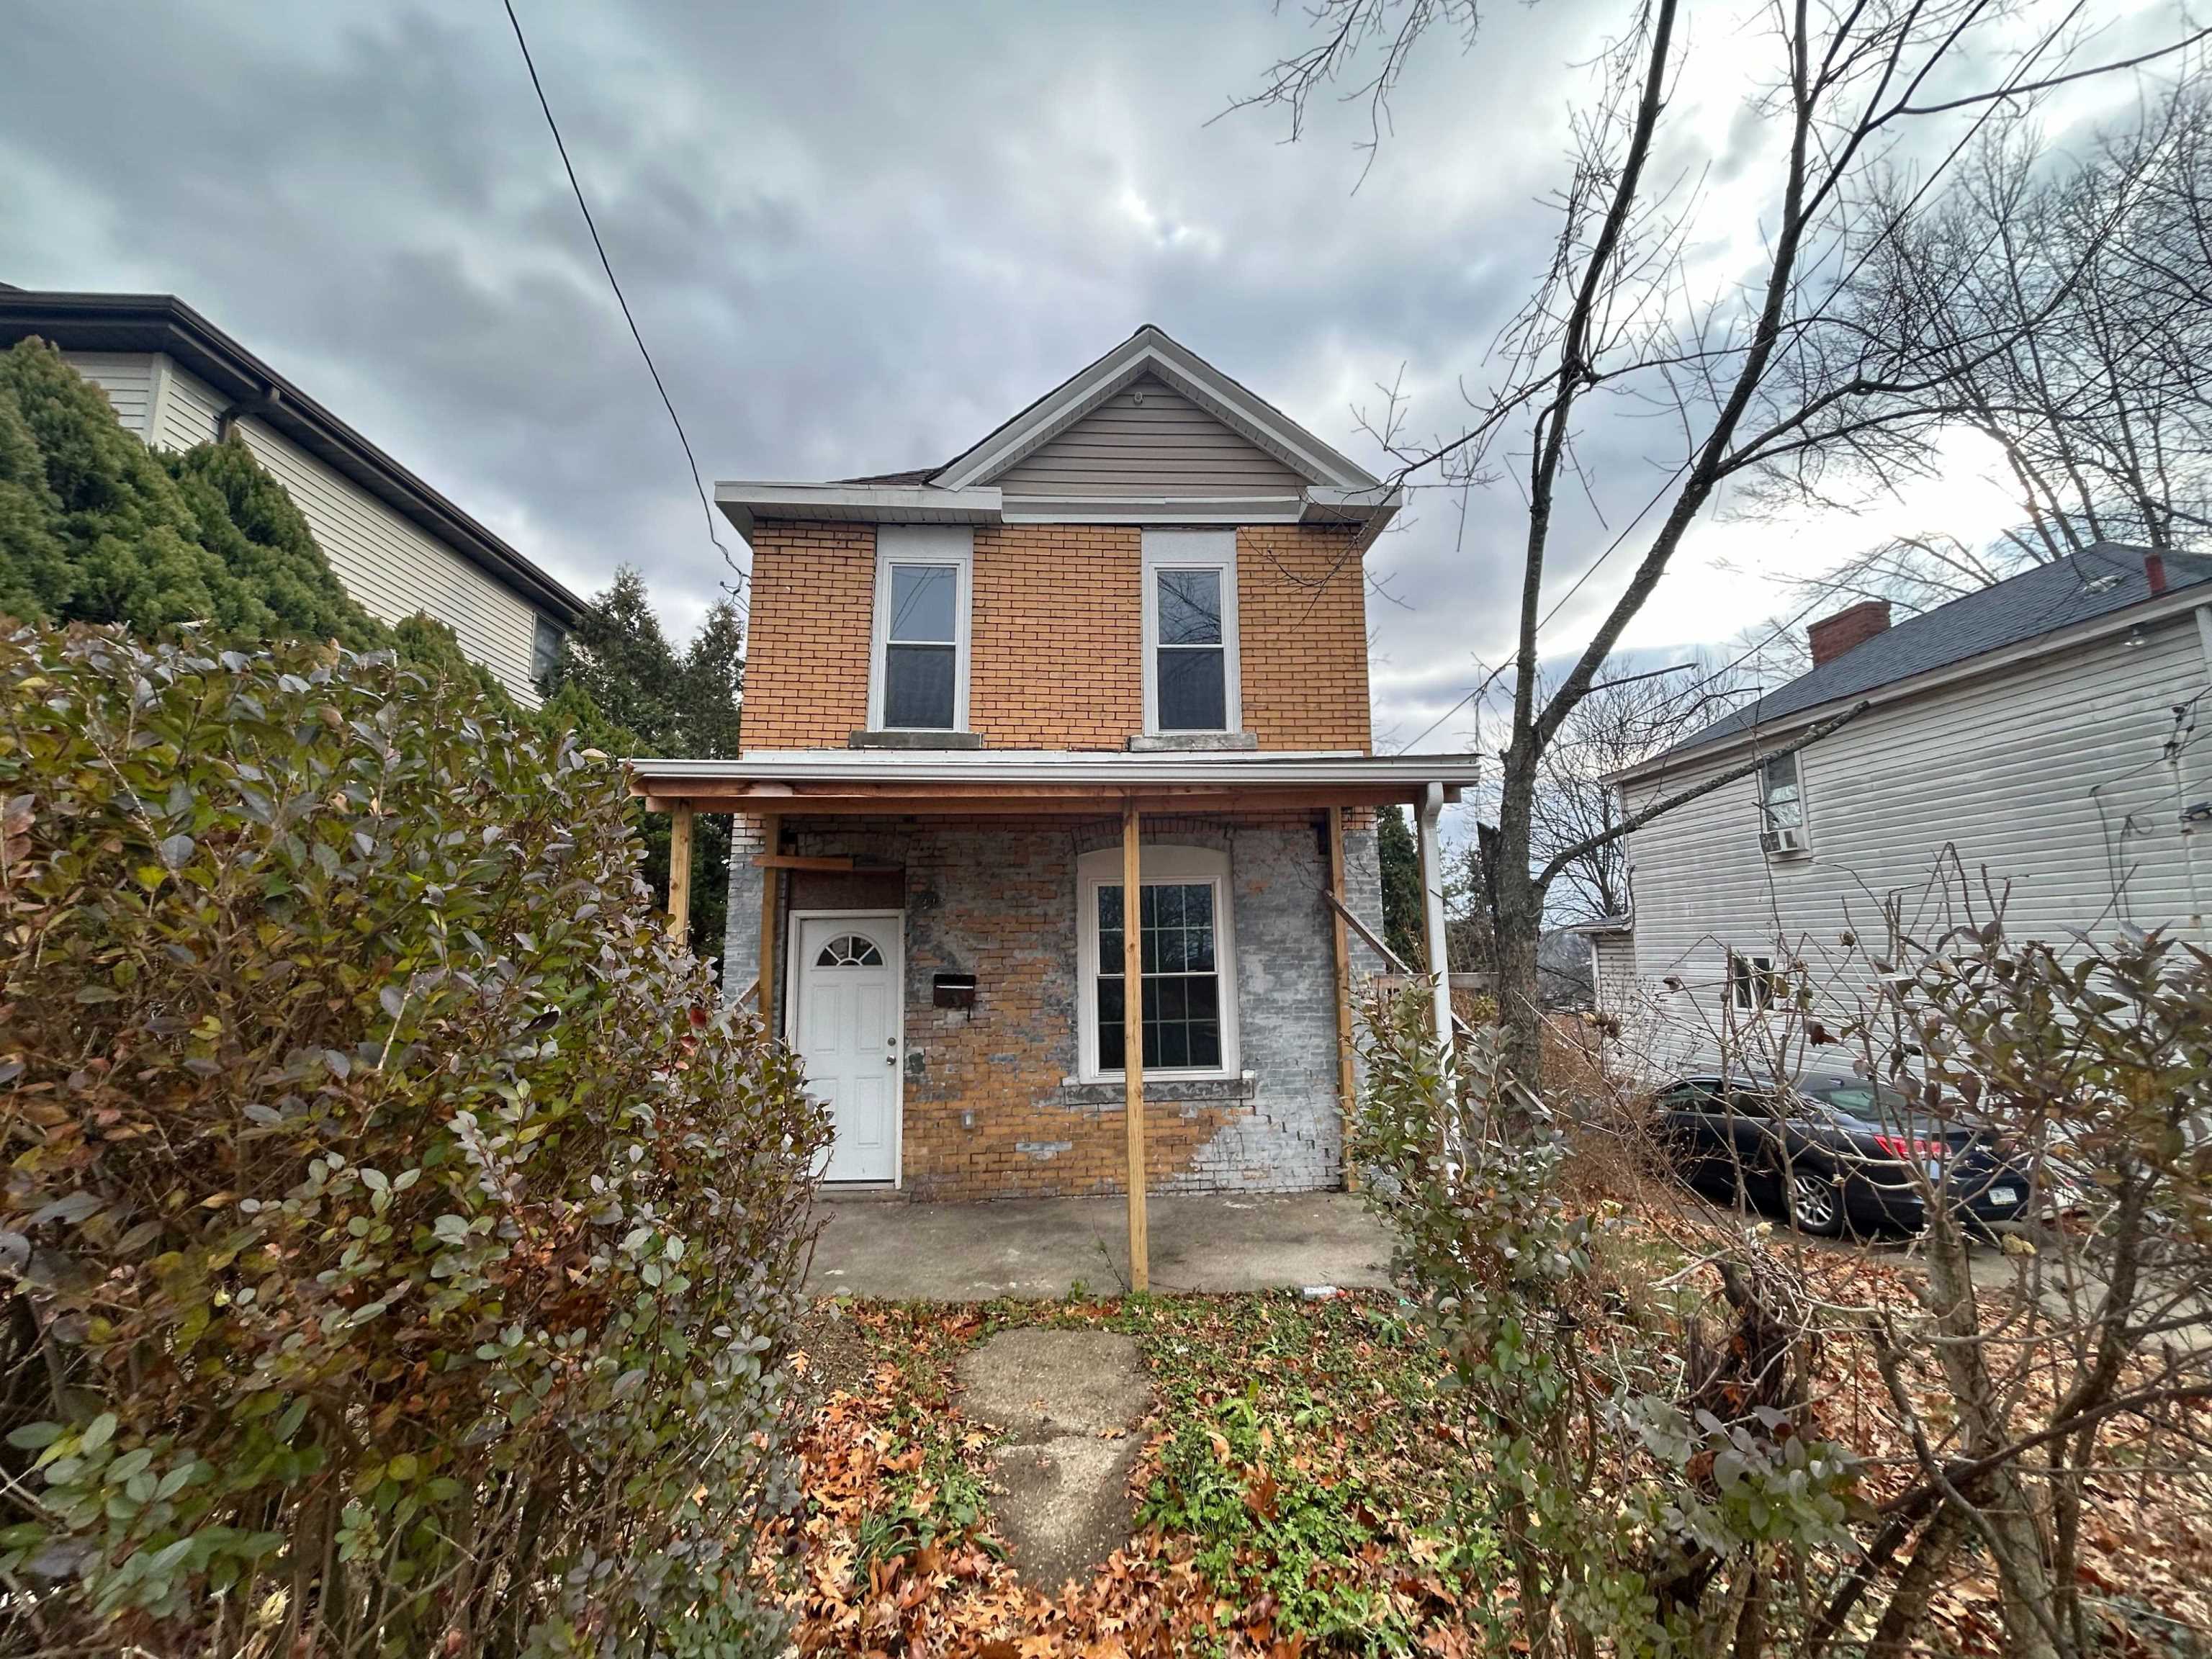 3907 McWhinney St, Munhall, PA